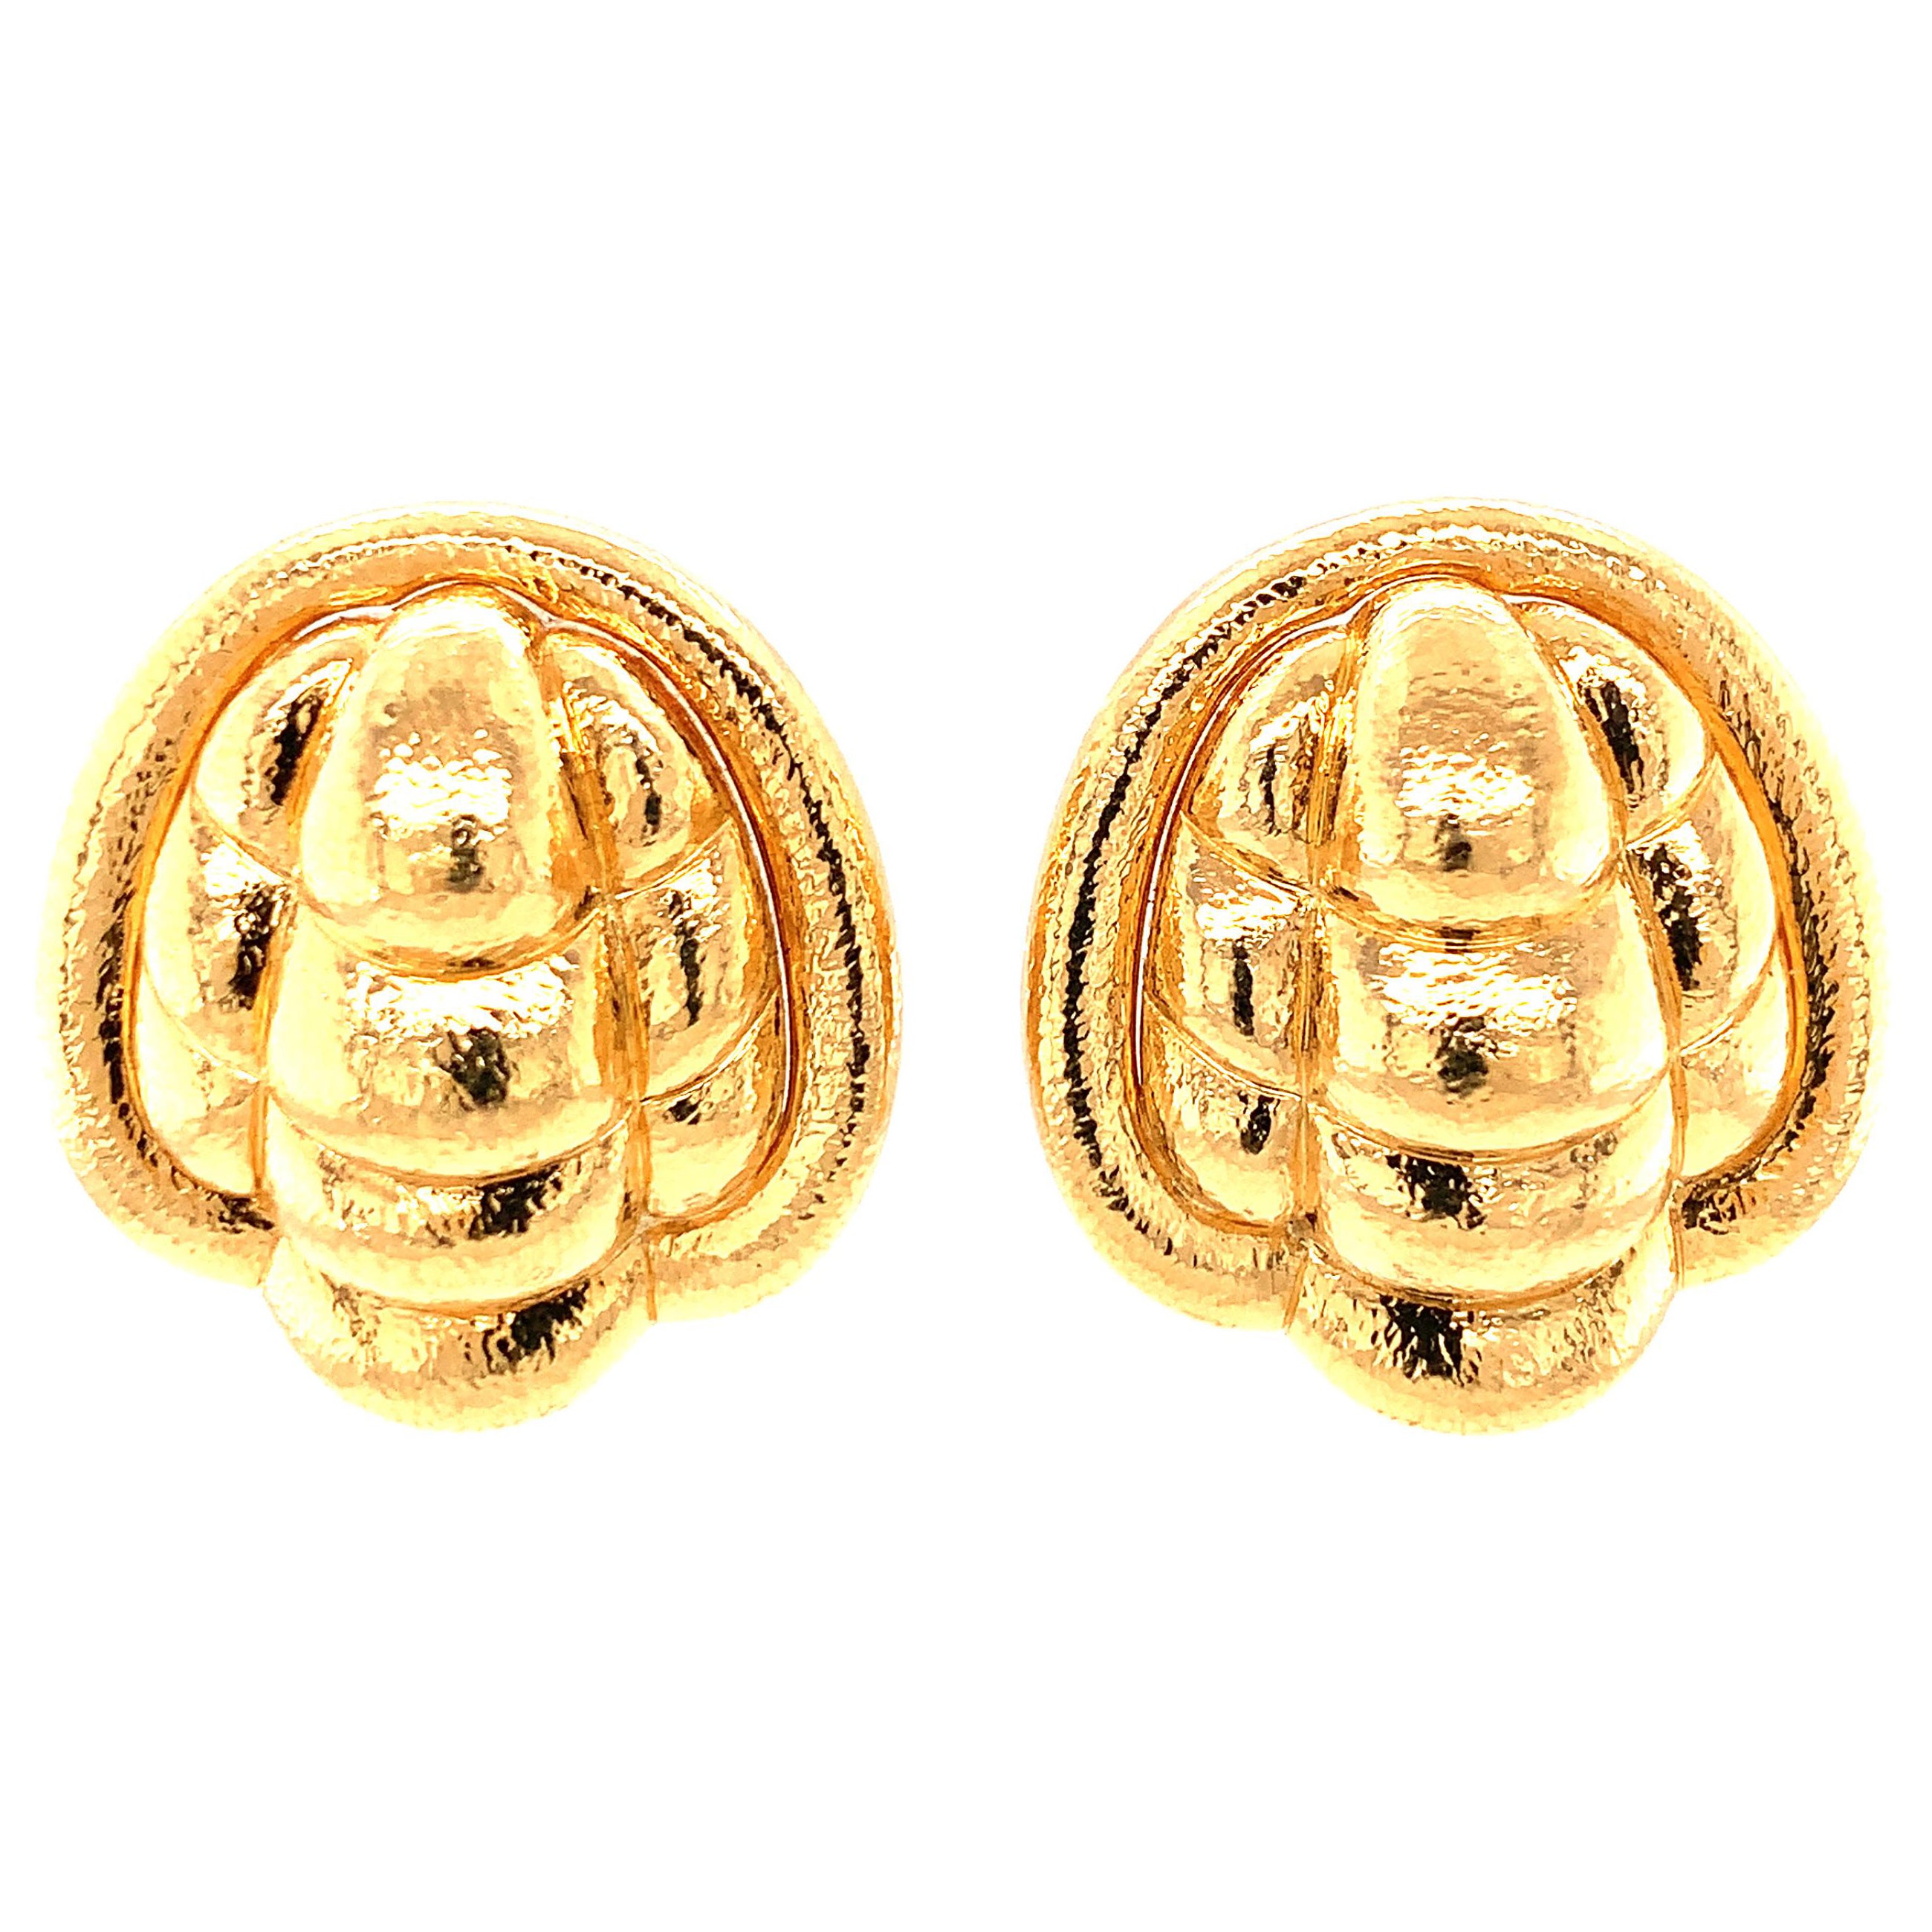 Hammered 18k Yellow Gold Earrings, circa 1960s